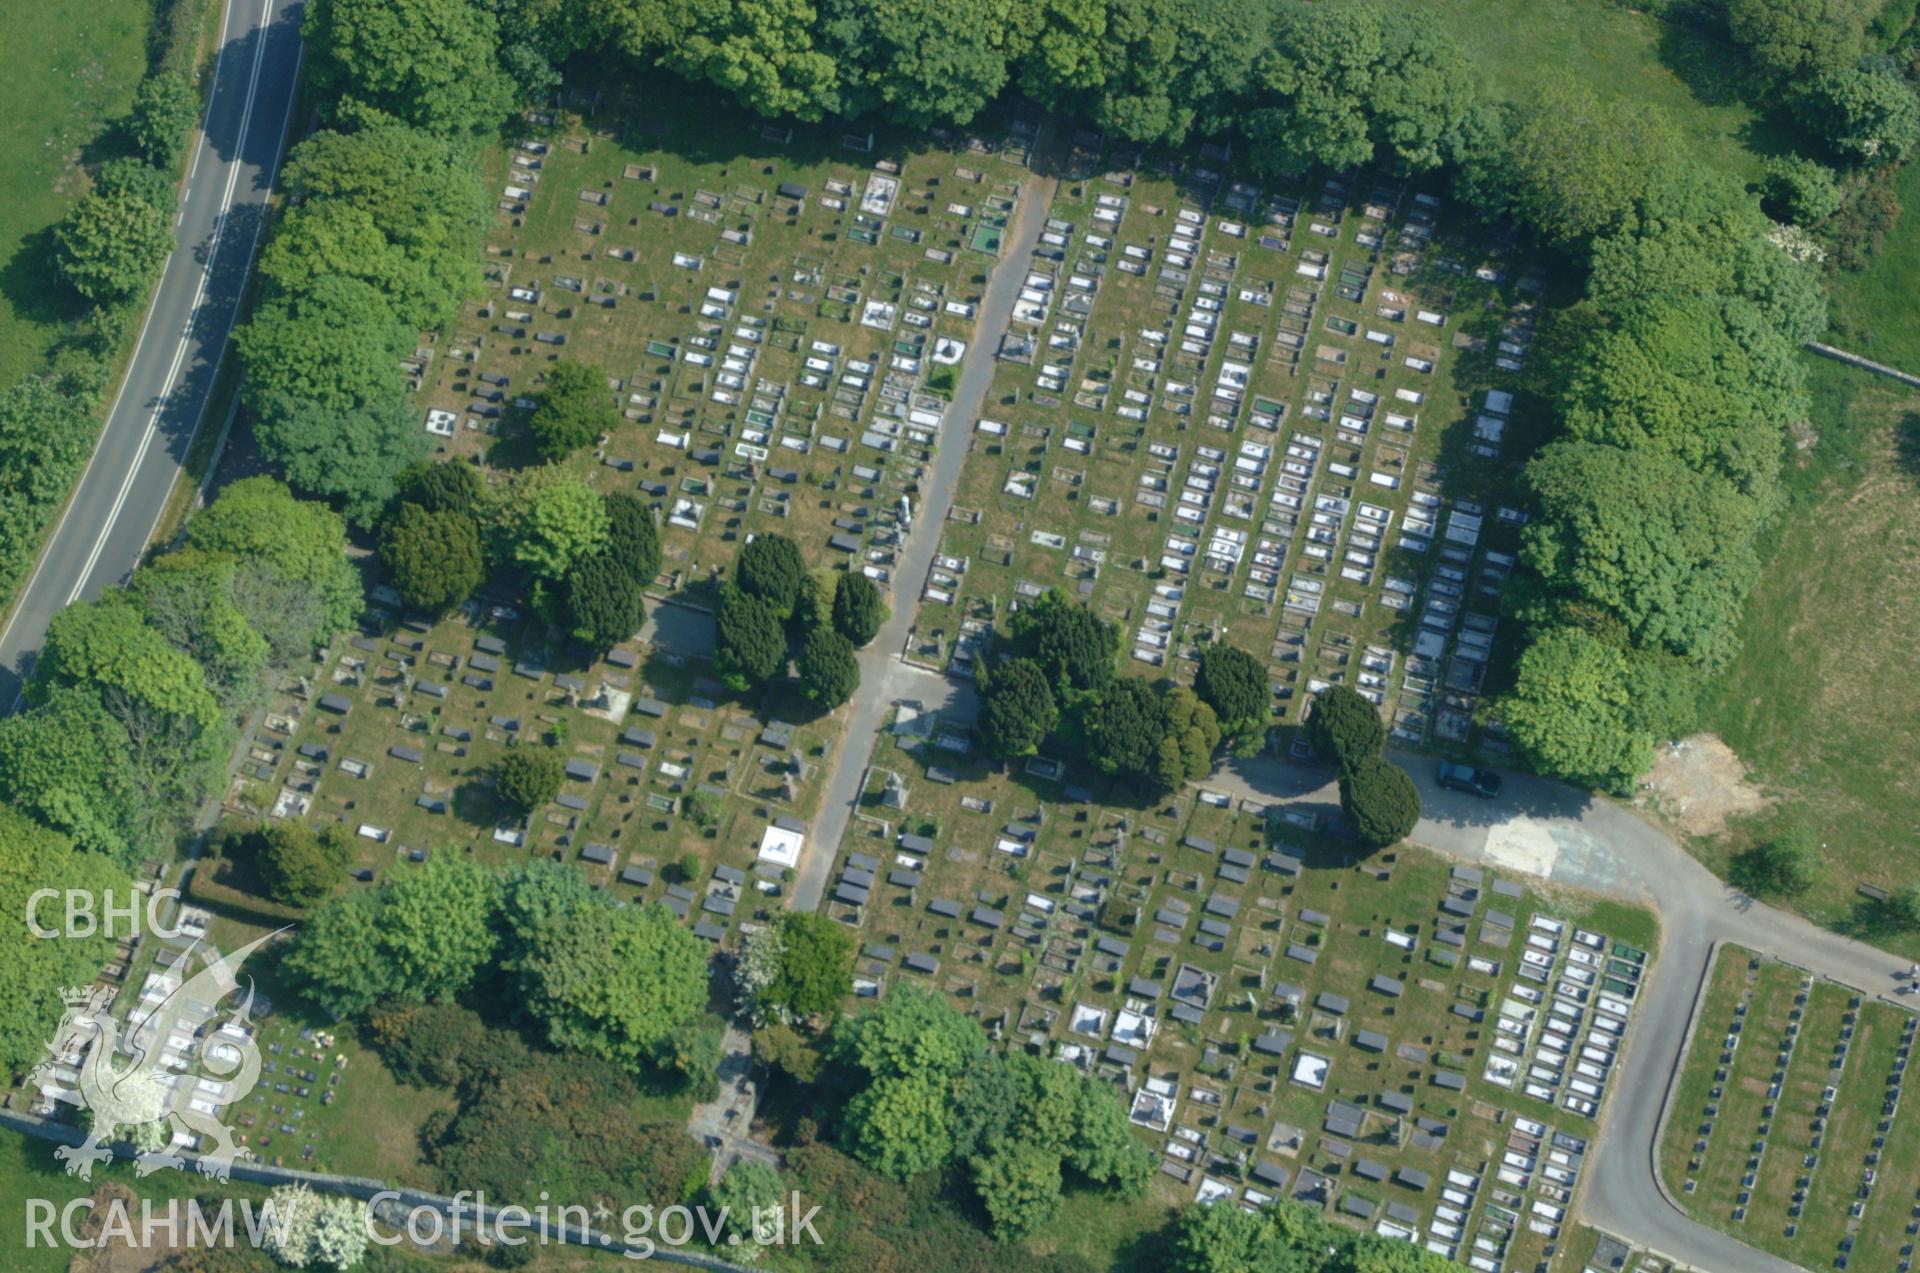 RCAHMW colour oblique aerial photograph of cemetery, Amlwch. Taken on 26 May 2004 by Toby Driver